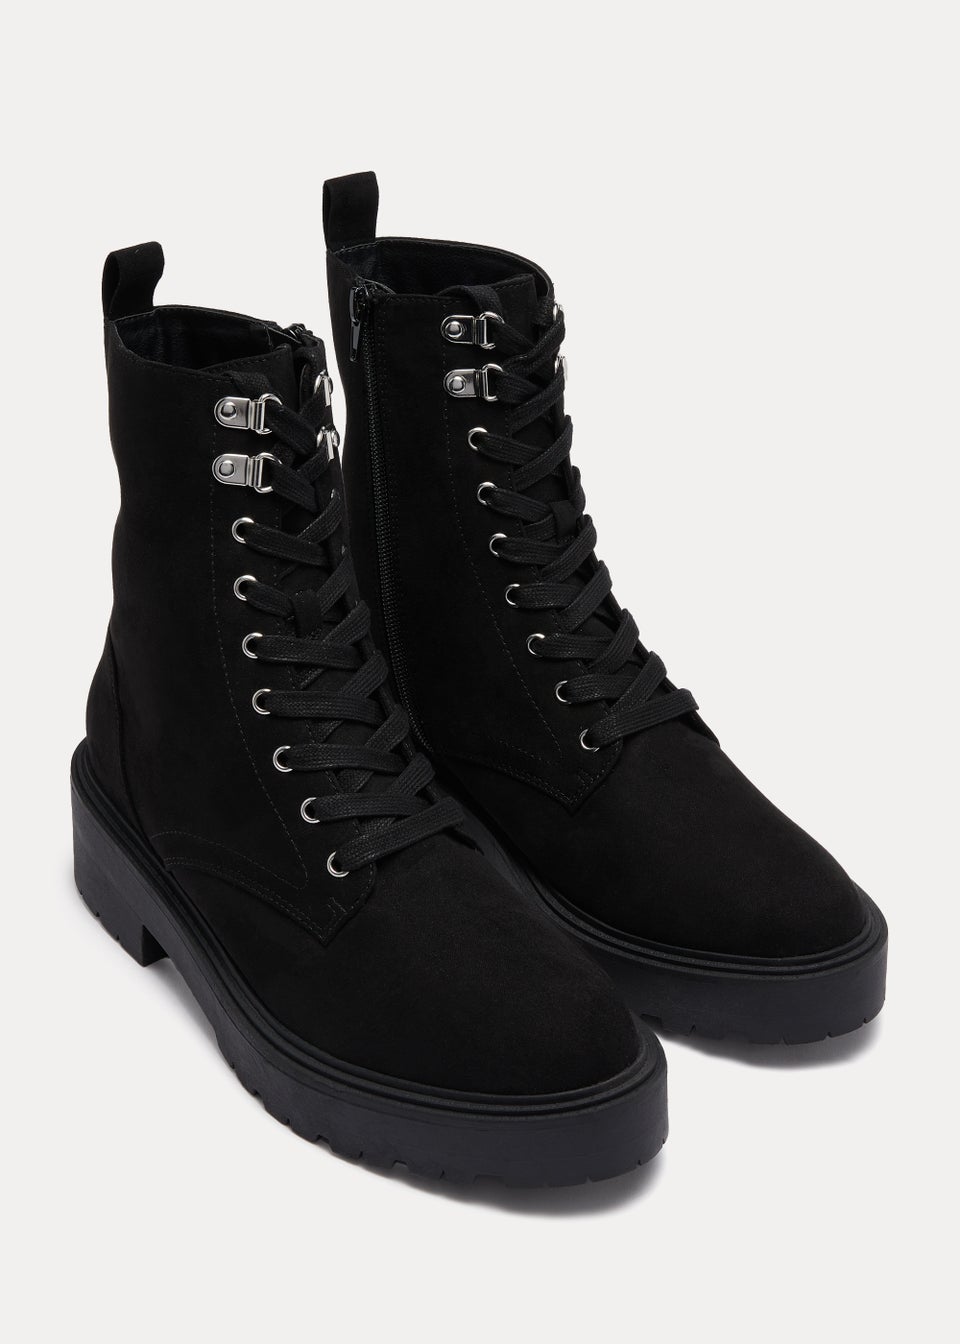 Black Military Lace Up Boots